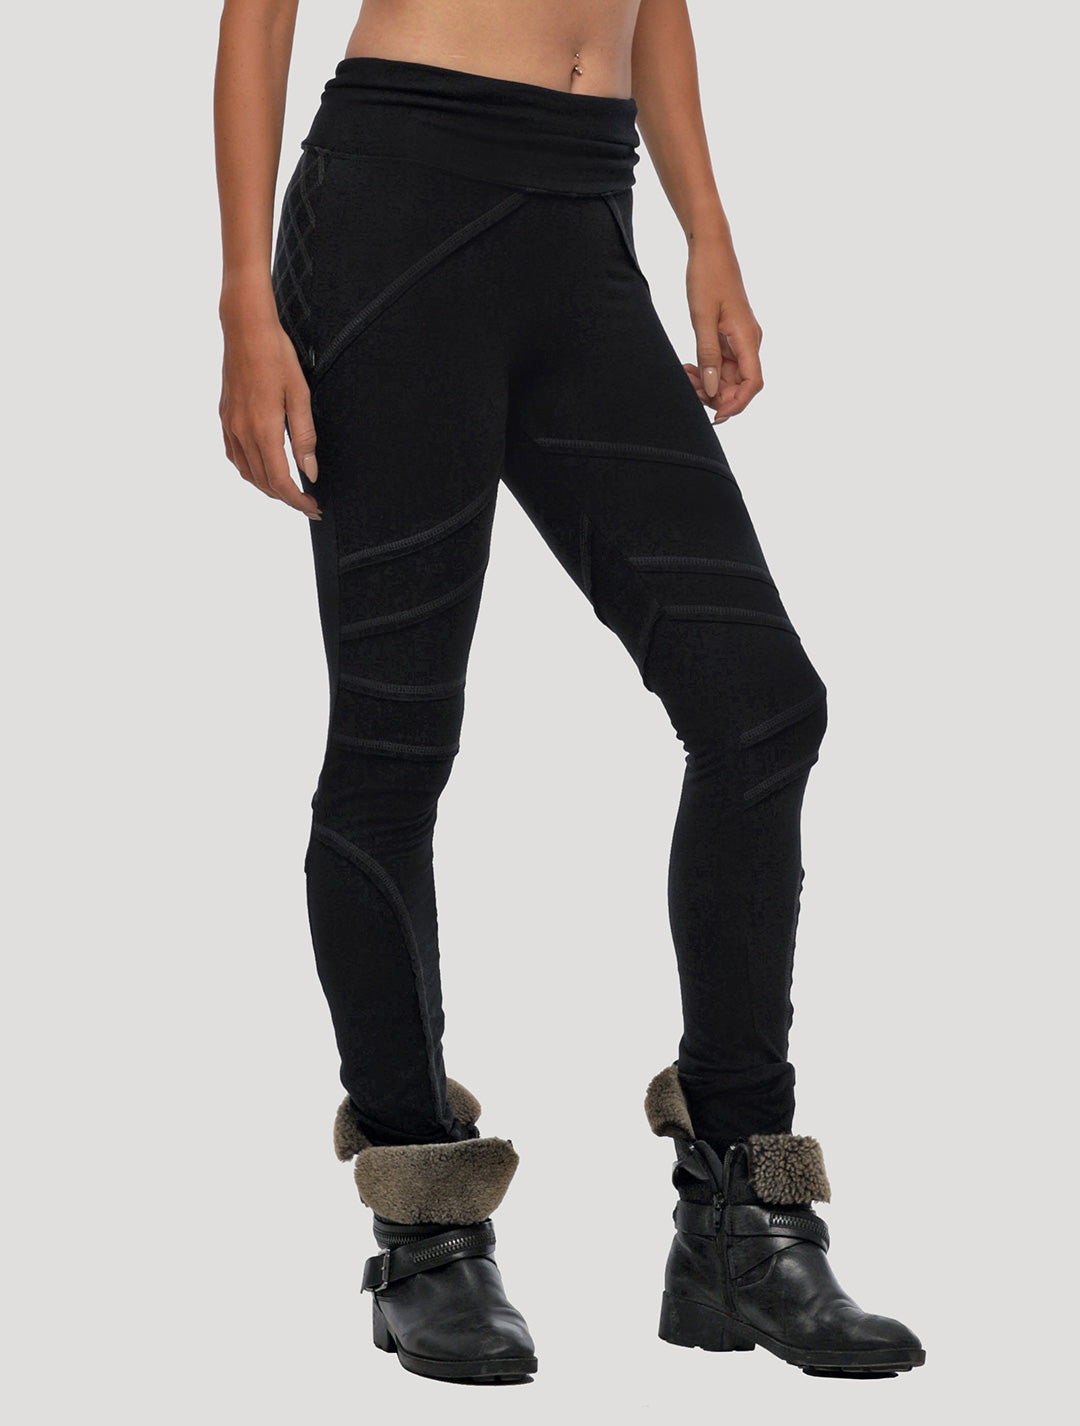 Mossimo Supply Co. Cut Out Active Pants, Tights & Leggings